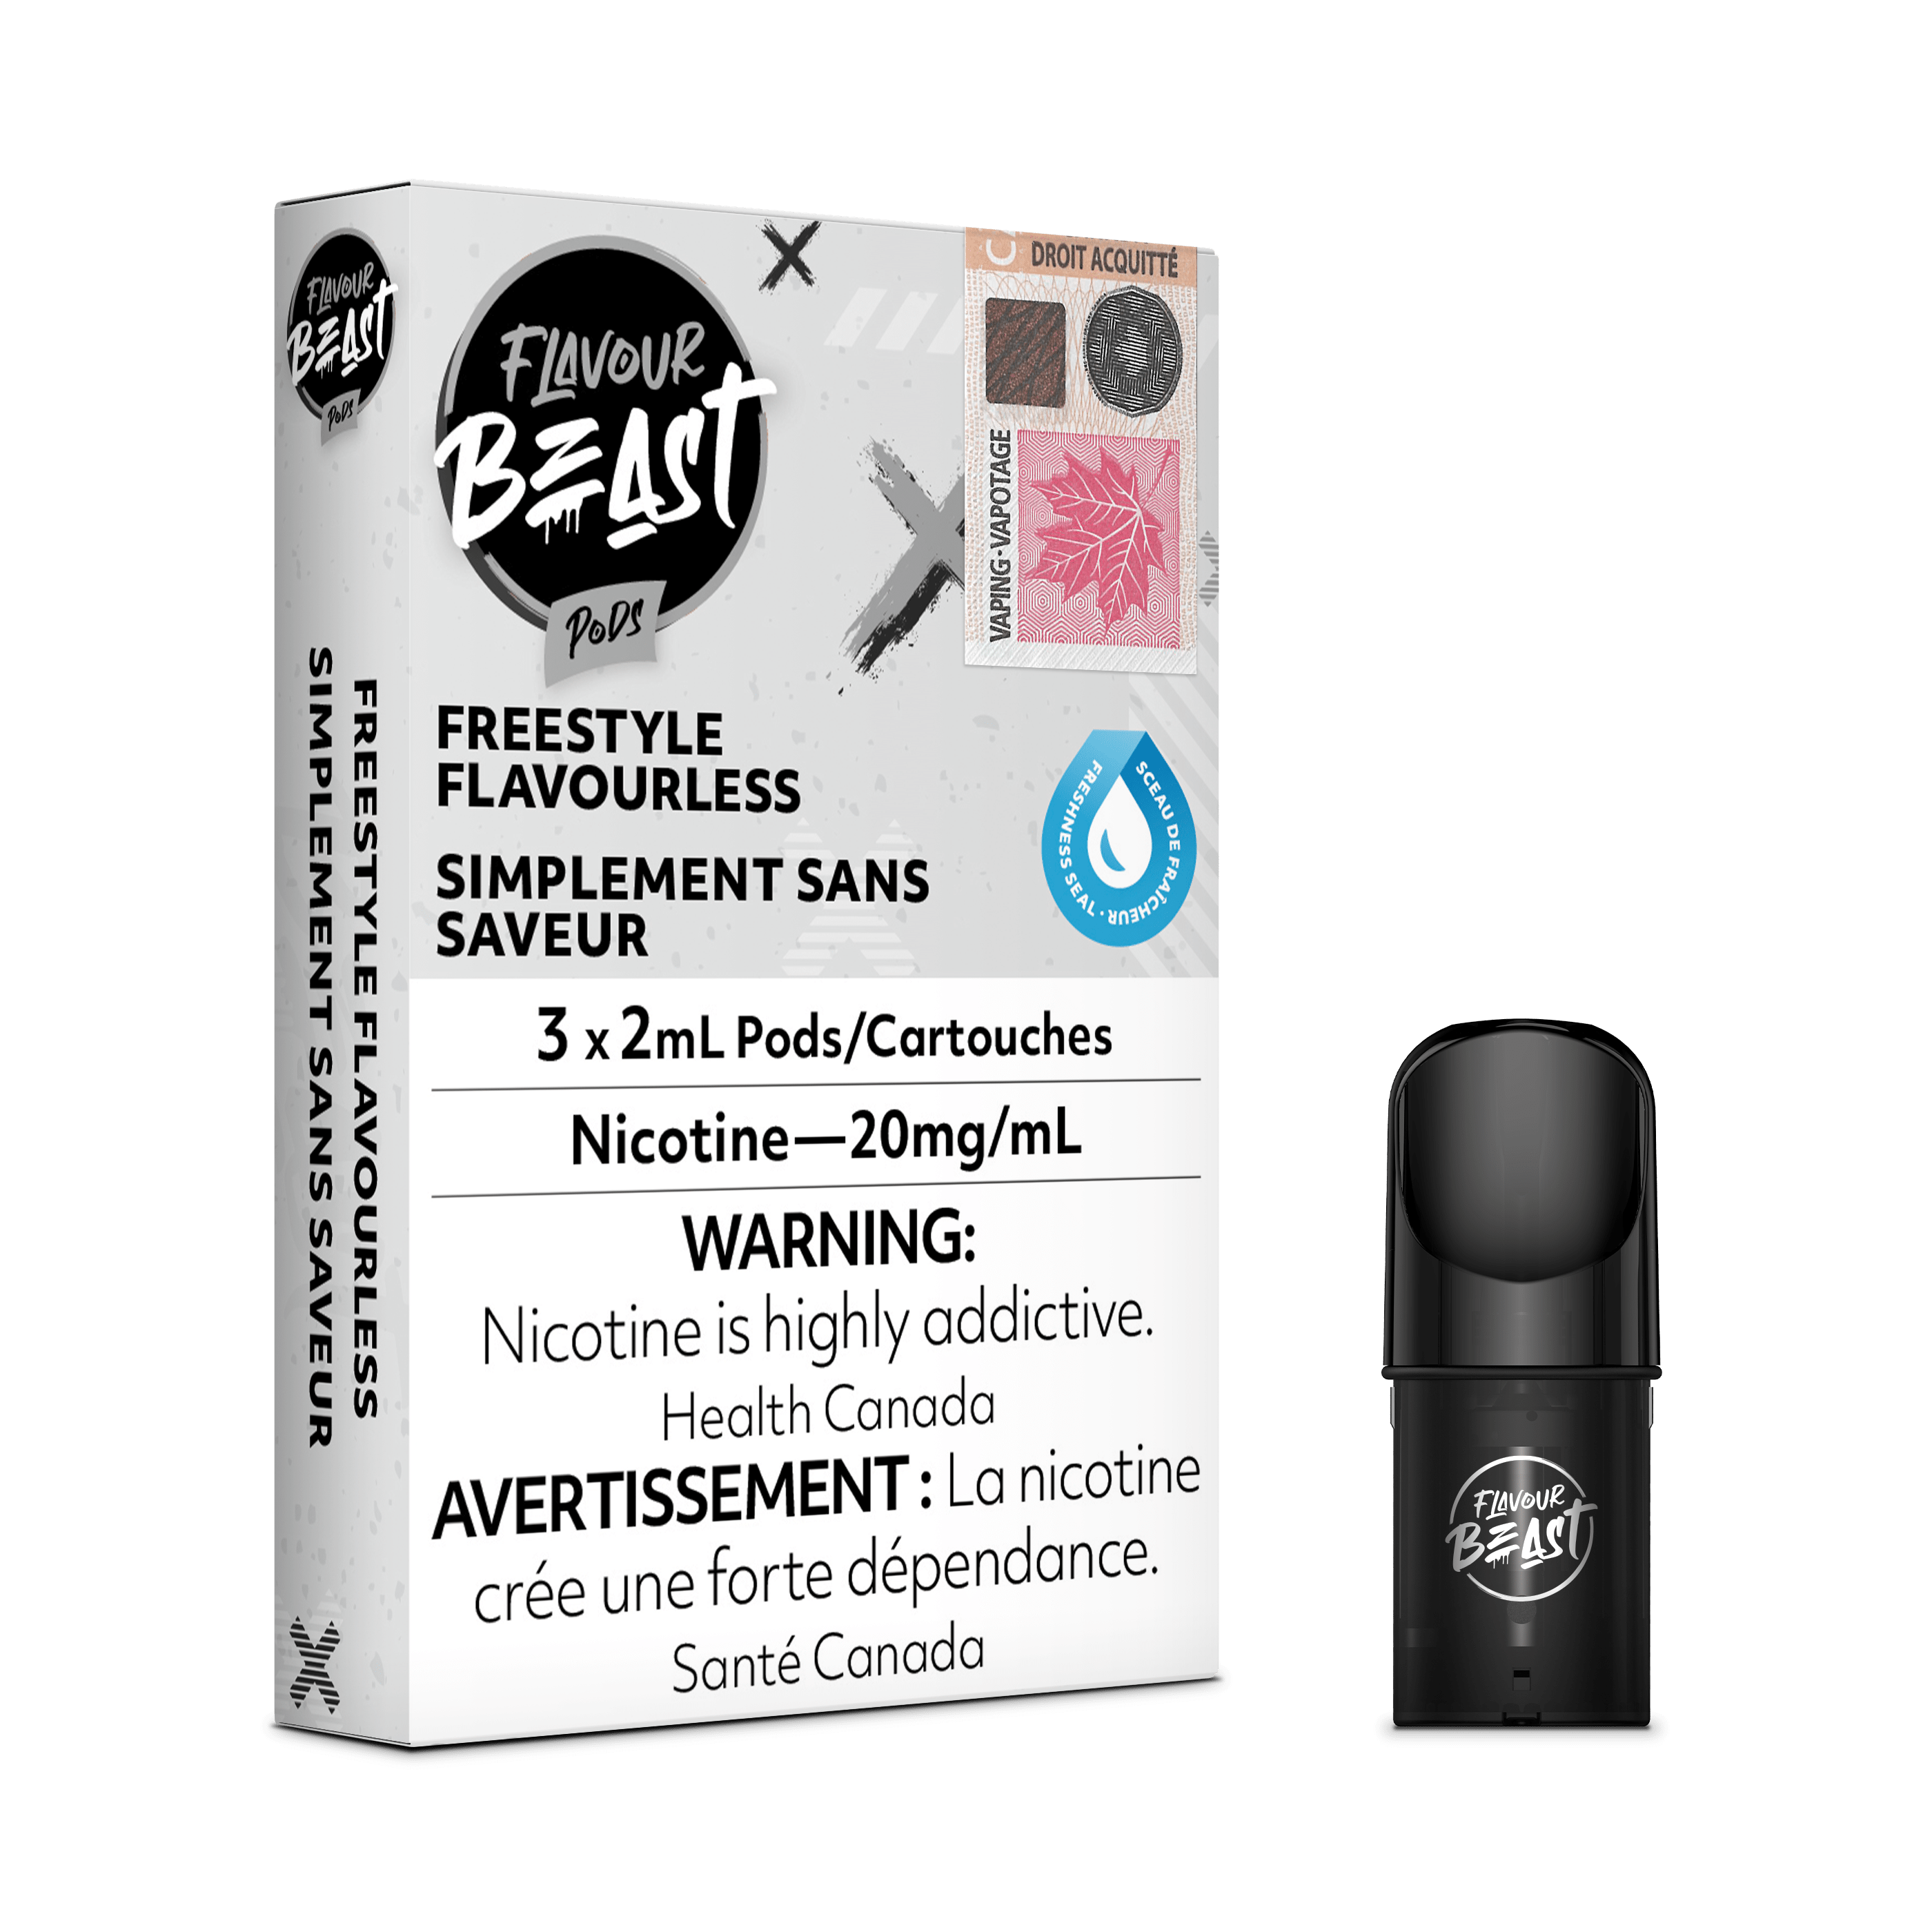 Flavour Beast - Freestyle Flavourless Vape Pod available on Canada online vape shop